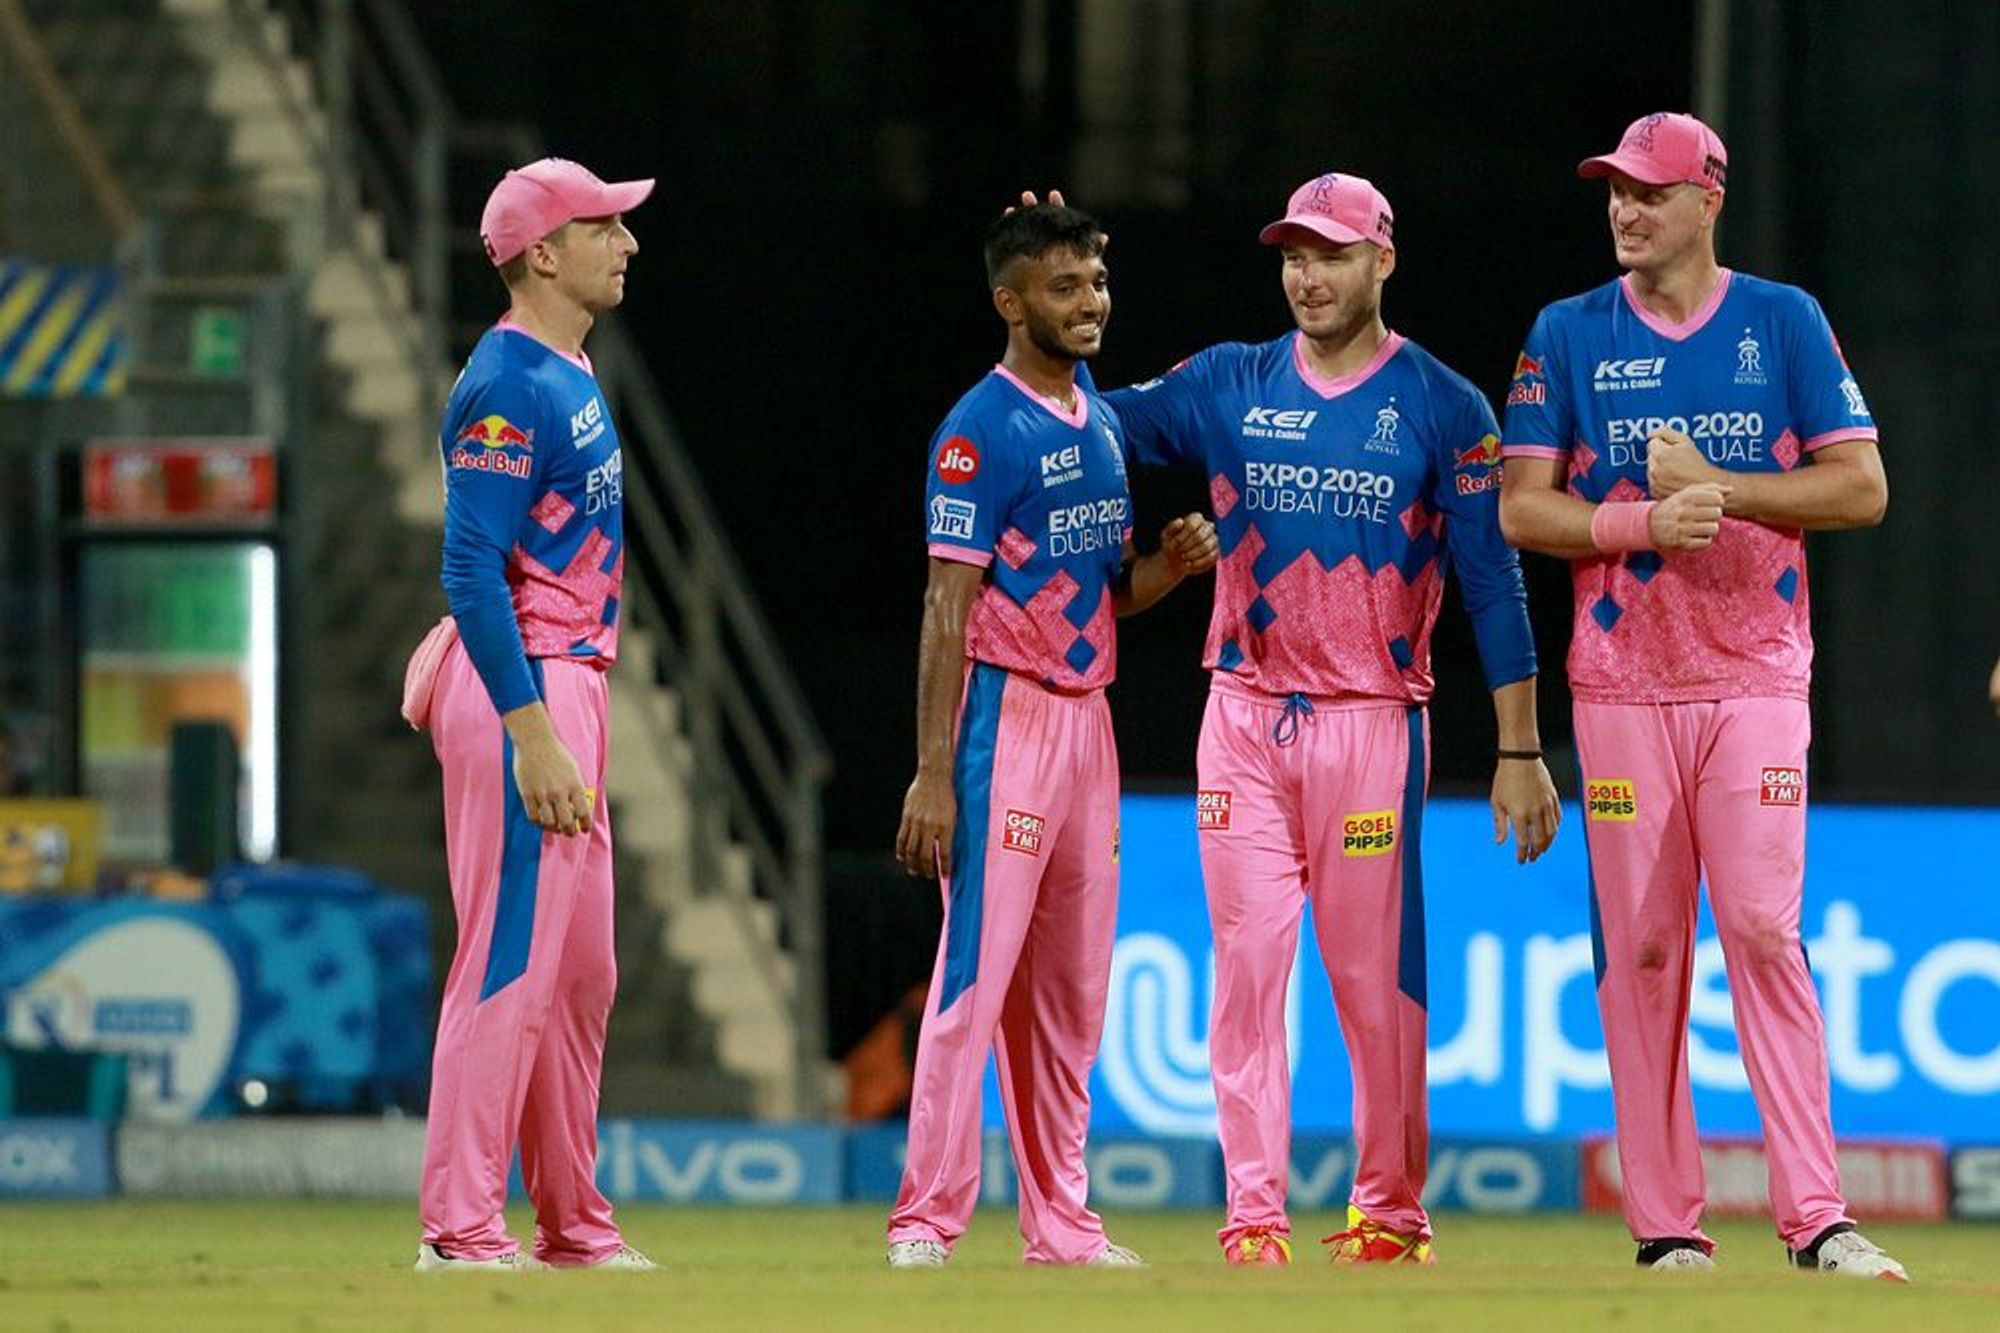 Rajasthan Royals are placed at 6th spot in IPL 2021 points table | BCCI-IPL